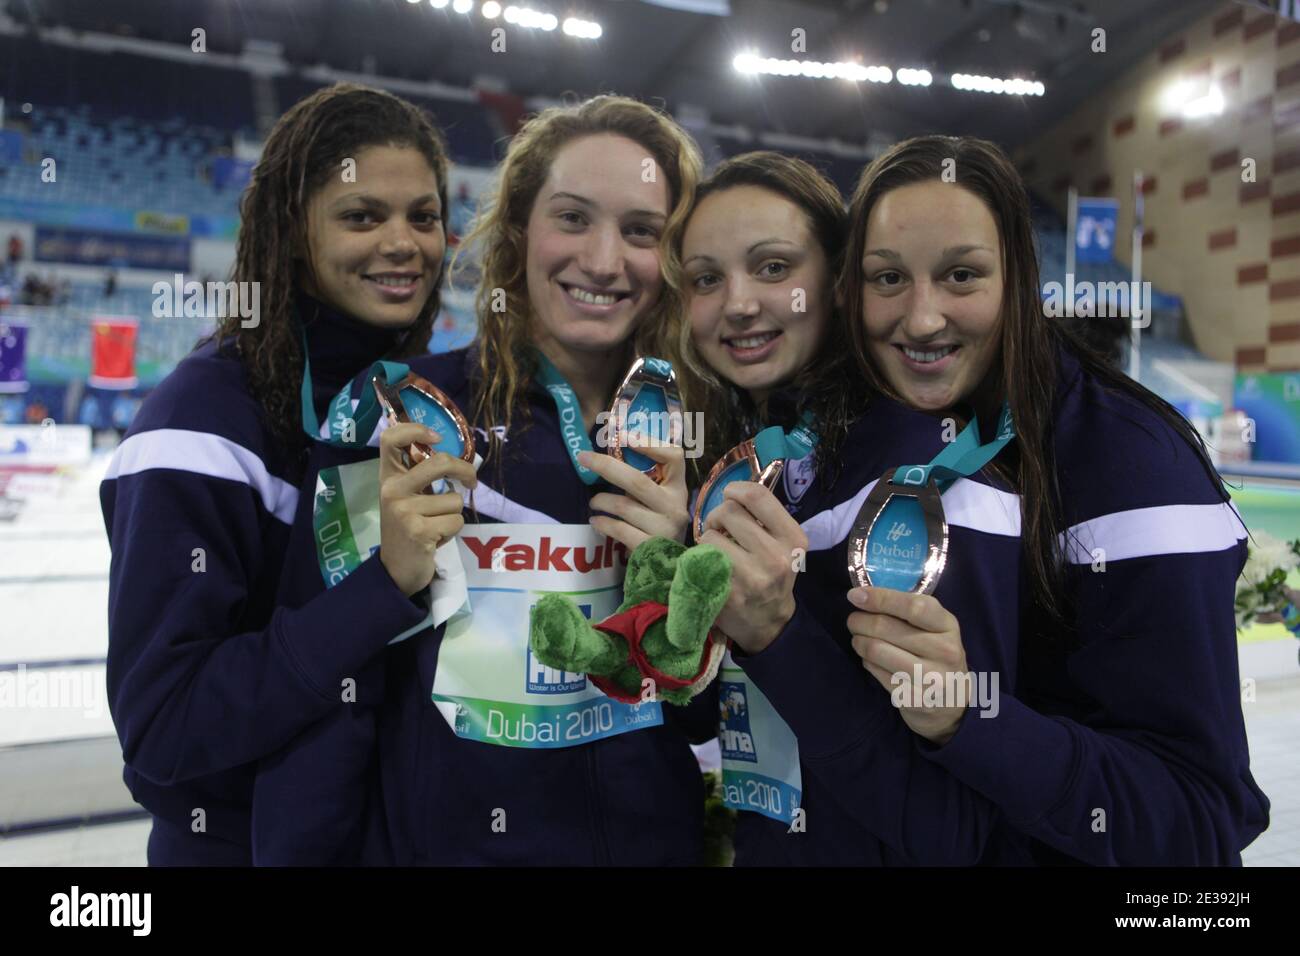 Bronze medalists Camille Muffat, Coralie Balmy, Mylene Lazare and Ophelie Cyrielle Etienne from France pose at the medal ceremony for the Women's 4x200 meter Freestyle Final during day one of the 10th FINA World Swimming Championships (25m) at the Hamdan bin Mohammed bin Rashid Sports Complex in Dubai, United Arab Emirates on December 15, 2010. Photo by Ammar Abd Rabbo/ABACAPRESS.COM Stock Photo